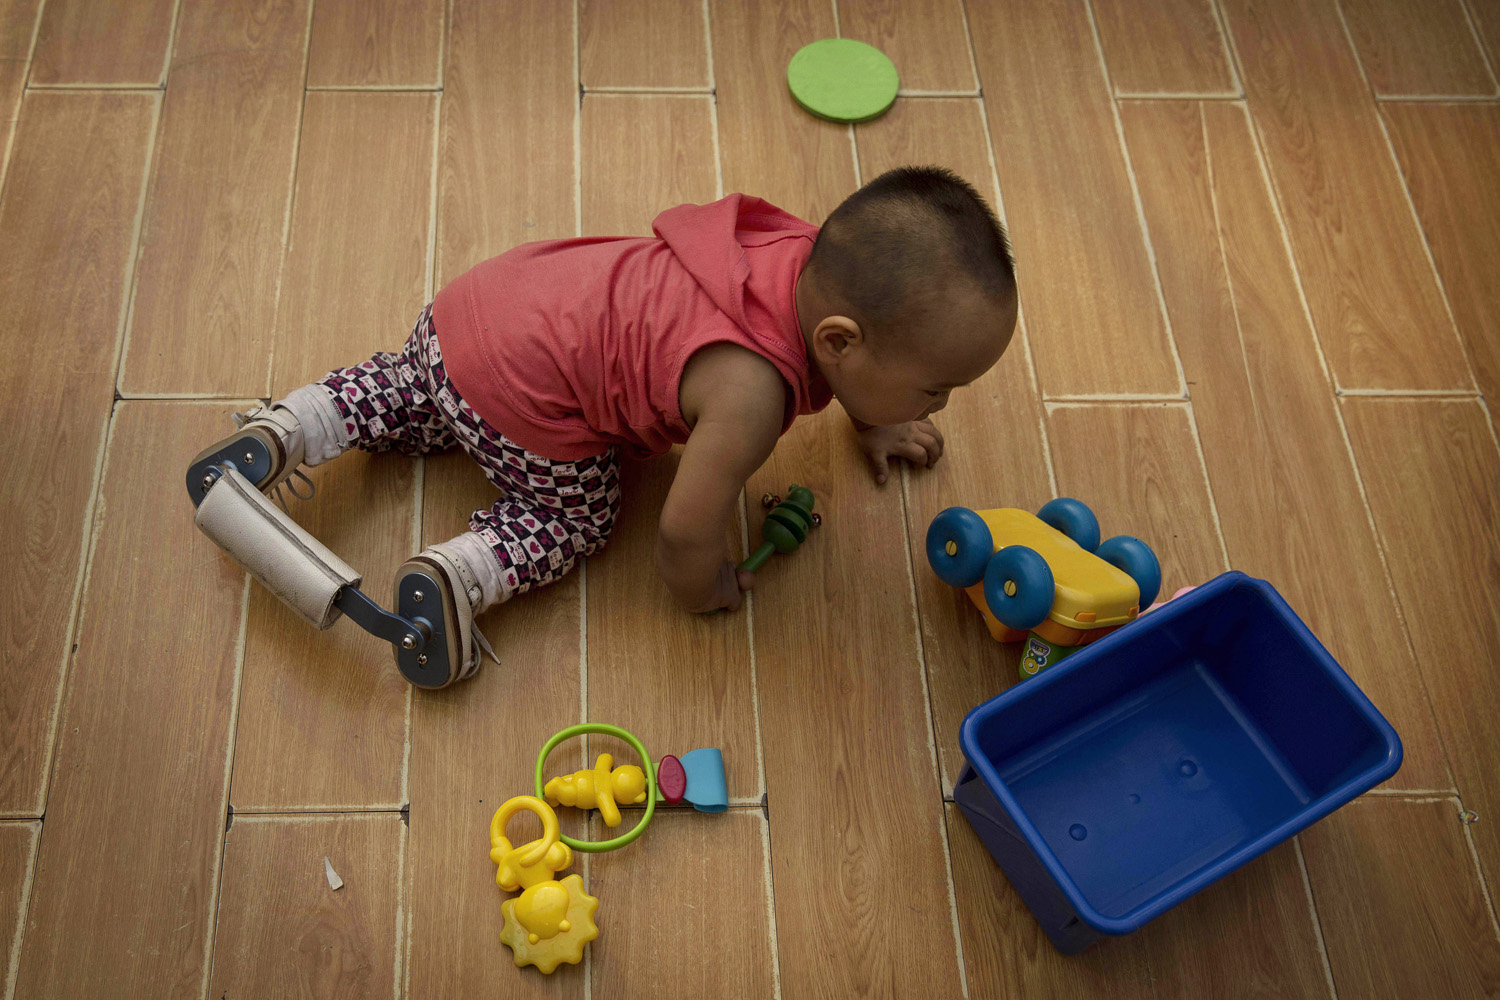 A young Chinese orphaned boy crawls wearing corrective leg braces on the floor of a foster care center on April 2, 2014 in Beijing, China. China's orphanages and foster homes used to be filled with healthy girls, reflecting the country's one-child policy and its preference for sons.Now the vast majority of orphans are sick or disabled.